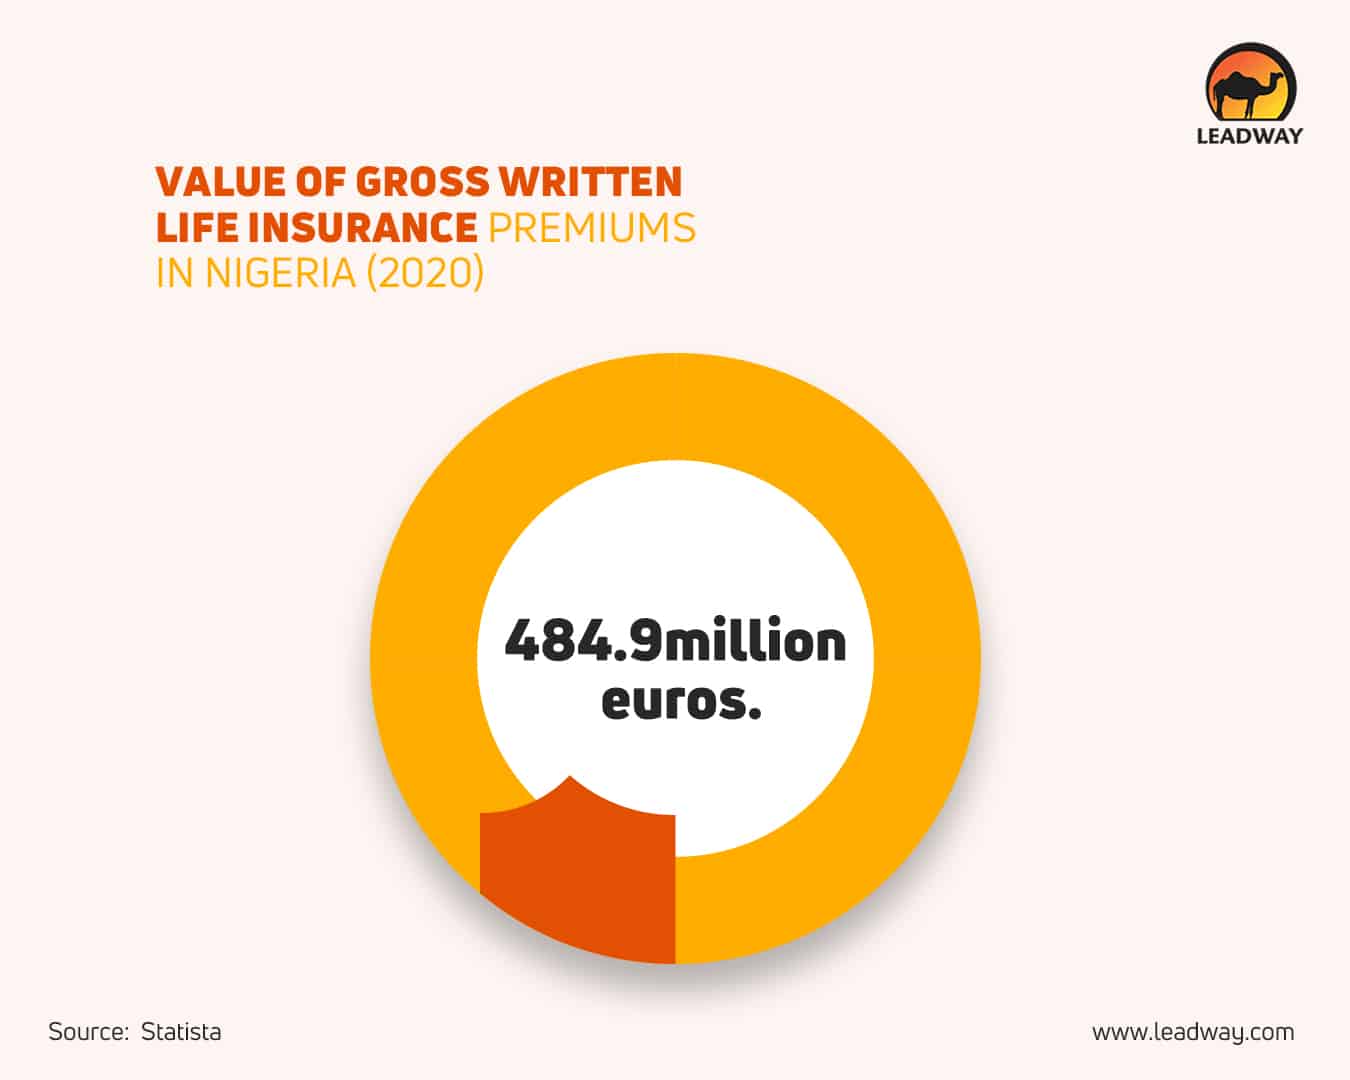 gross written life insurance premiums in Nigeria infographic